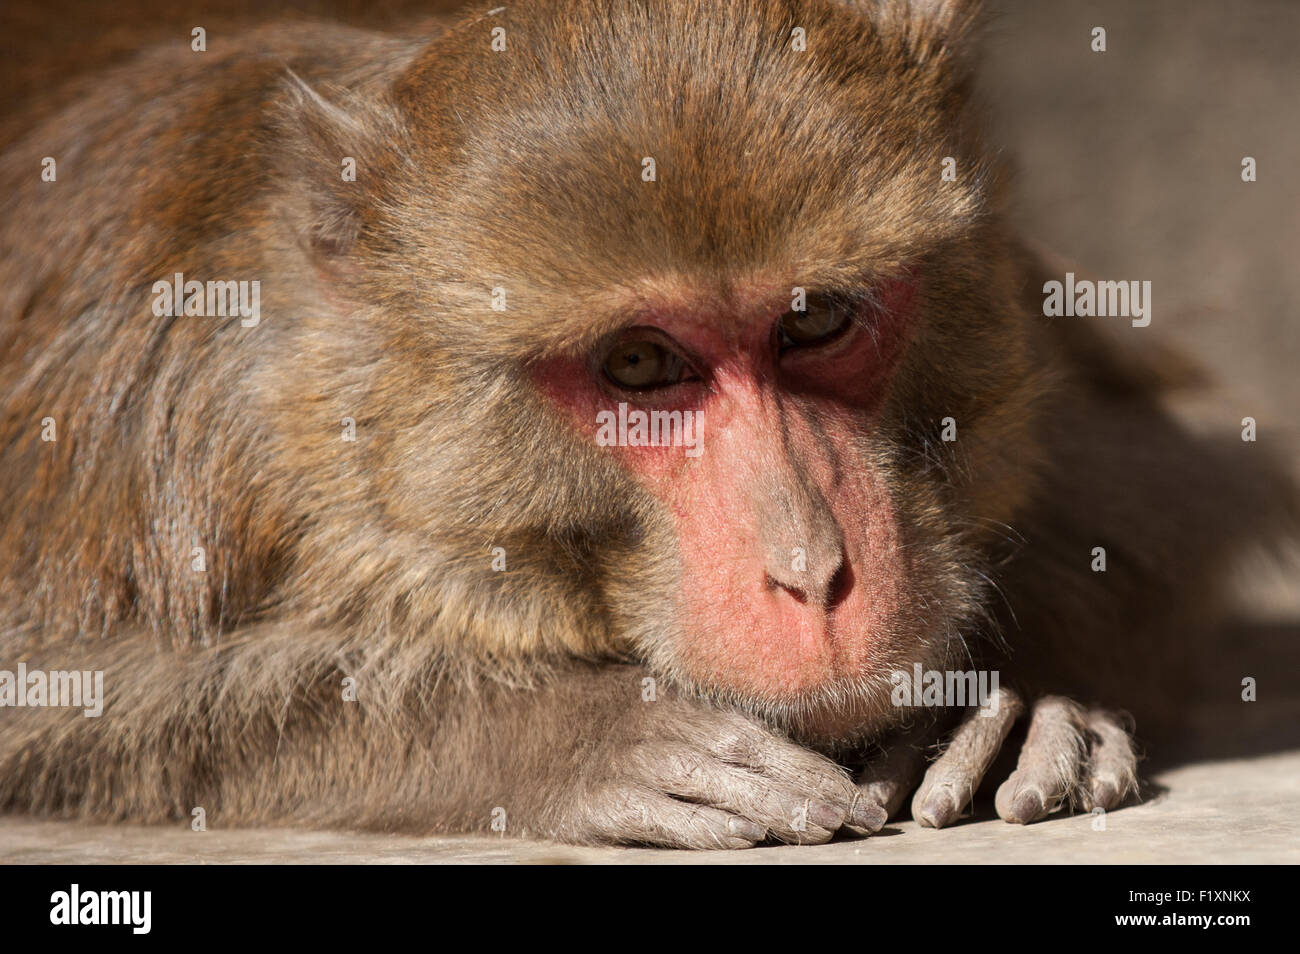 Shimla, Himachal Pradesh, India. Portrait of a red-faced rhesus macaque monkey looking at the camera. Stock Photo